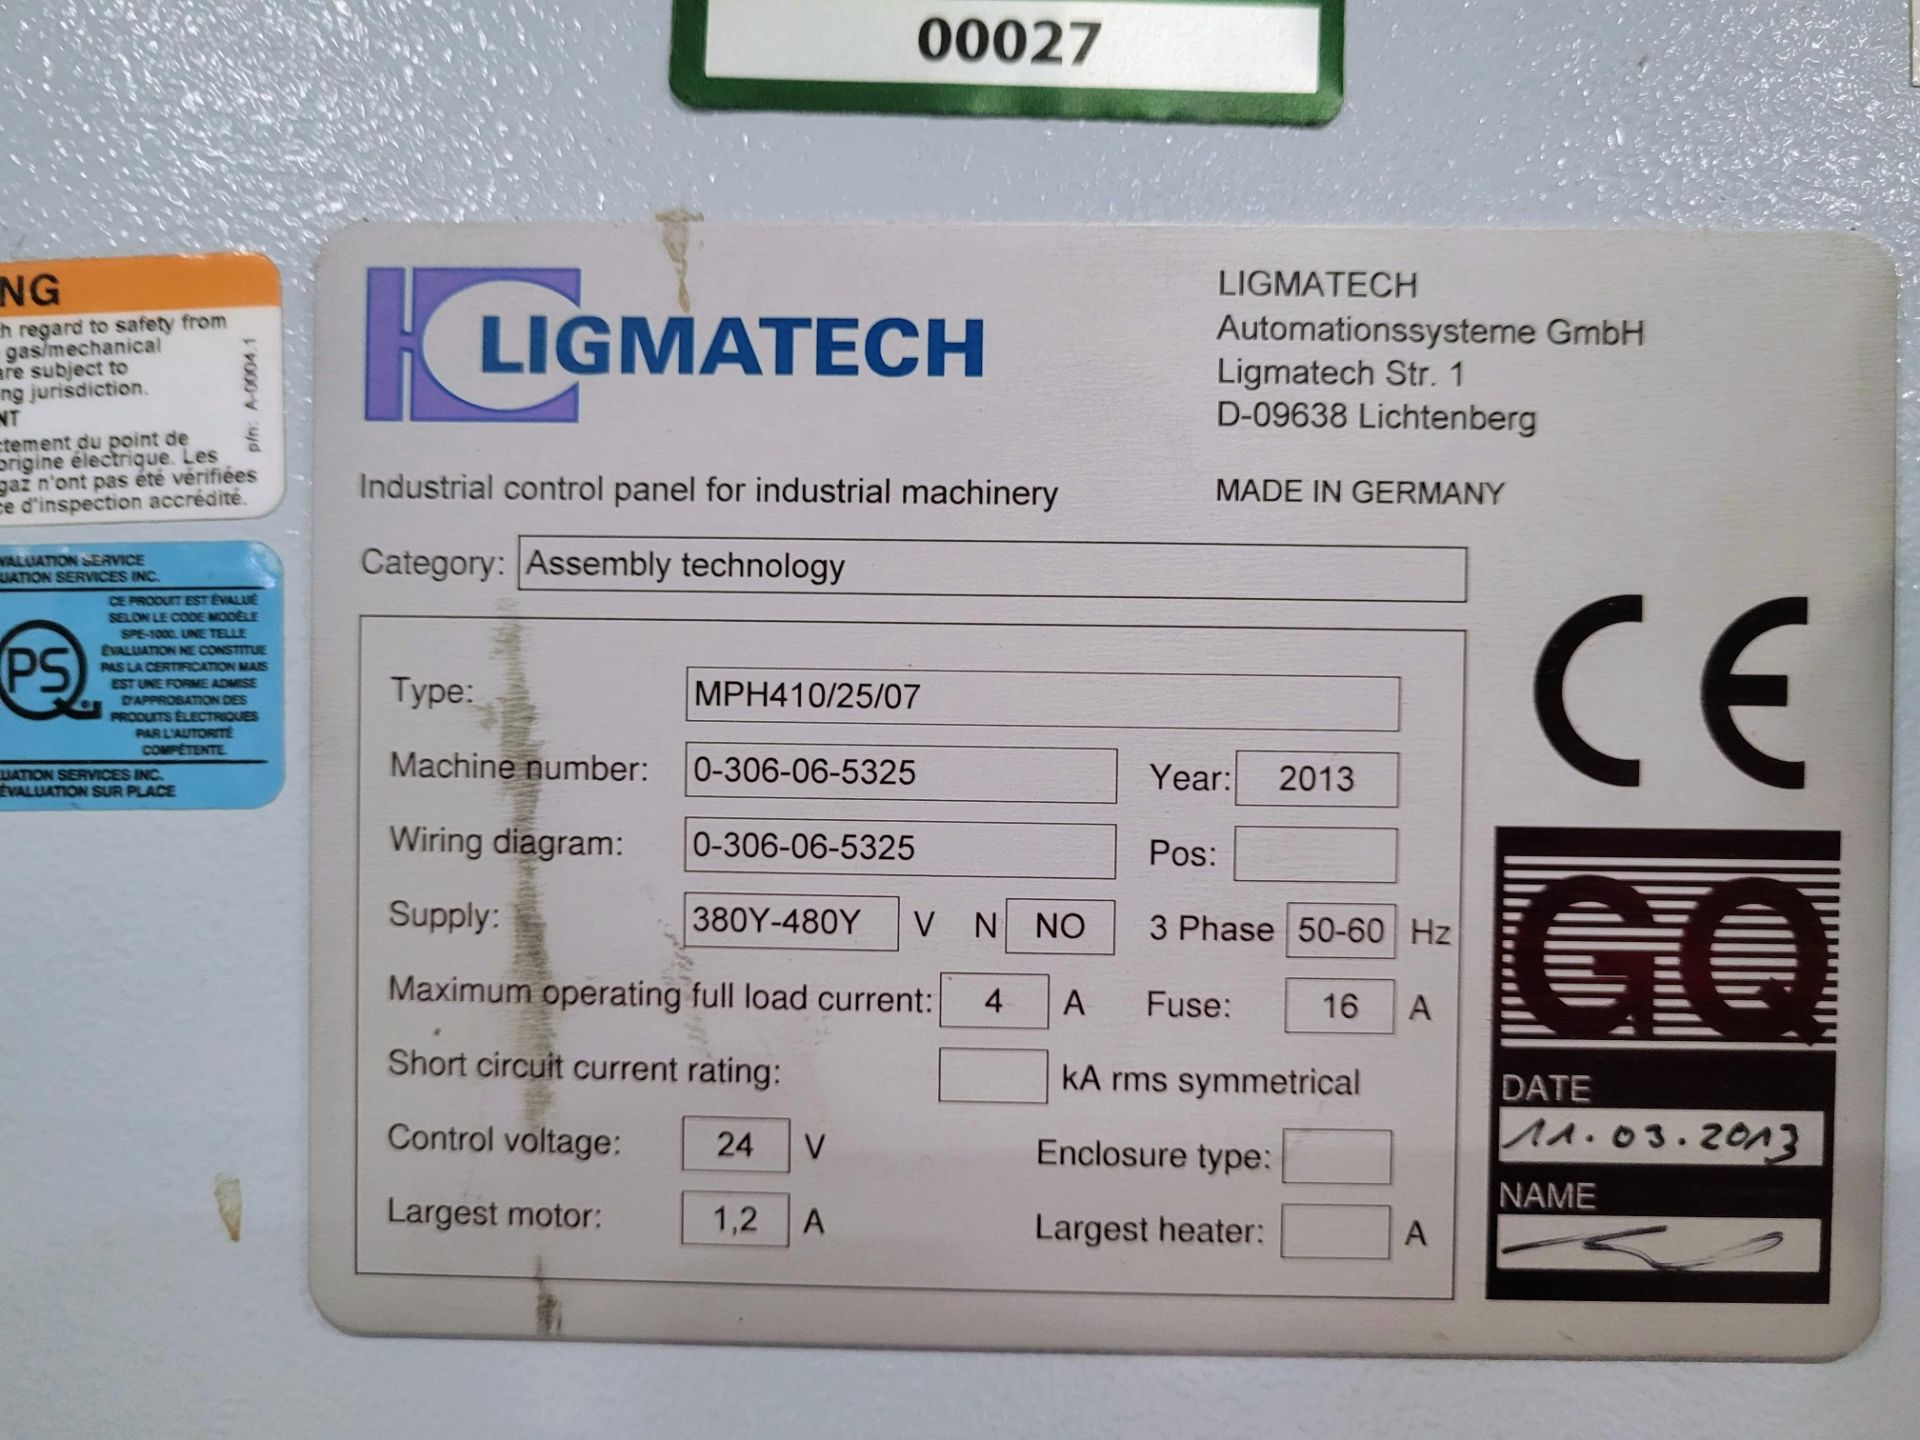 2013 LIGMATECH MPH410/25/07 CASE CLAMP, 78" X 32" OPENING, S/N 0-306-06-5325 - Image 4 of 4